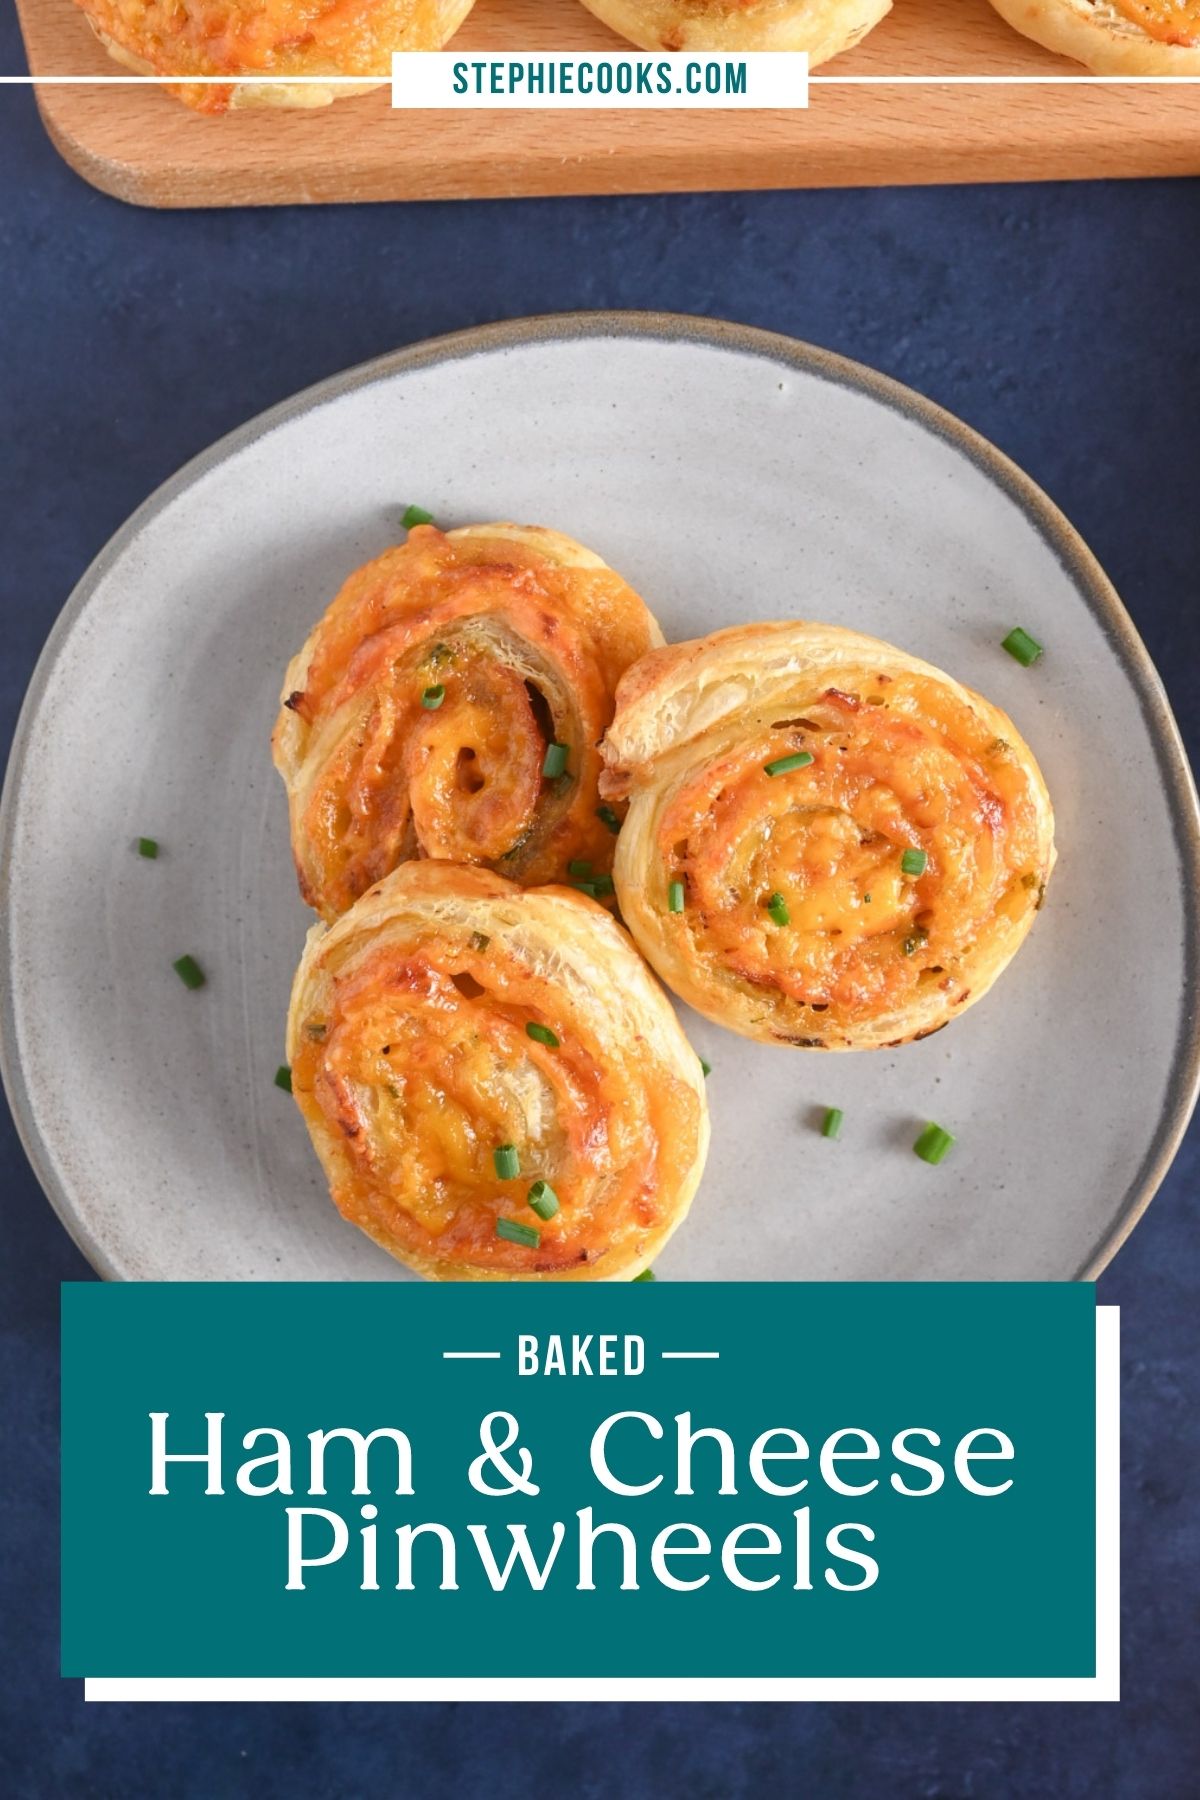 Overhead view of a gray plate holding three hot ham and cheese pinwheels set next to a wooden board holding more pinwheels. Text overlay includes recipe name.